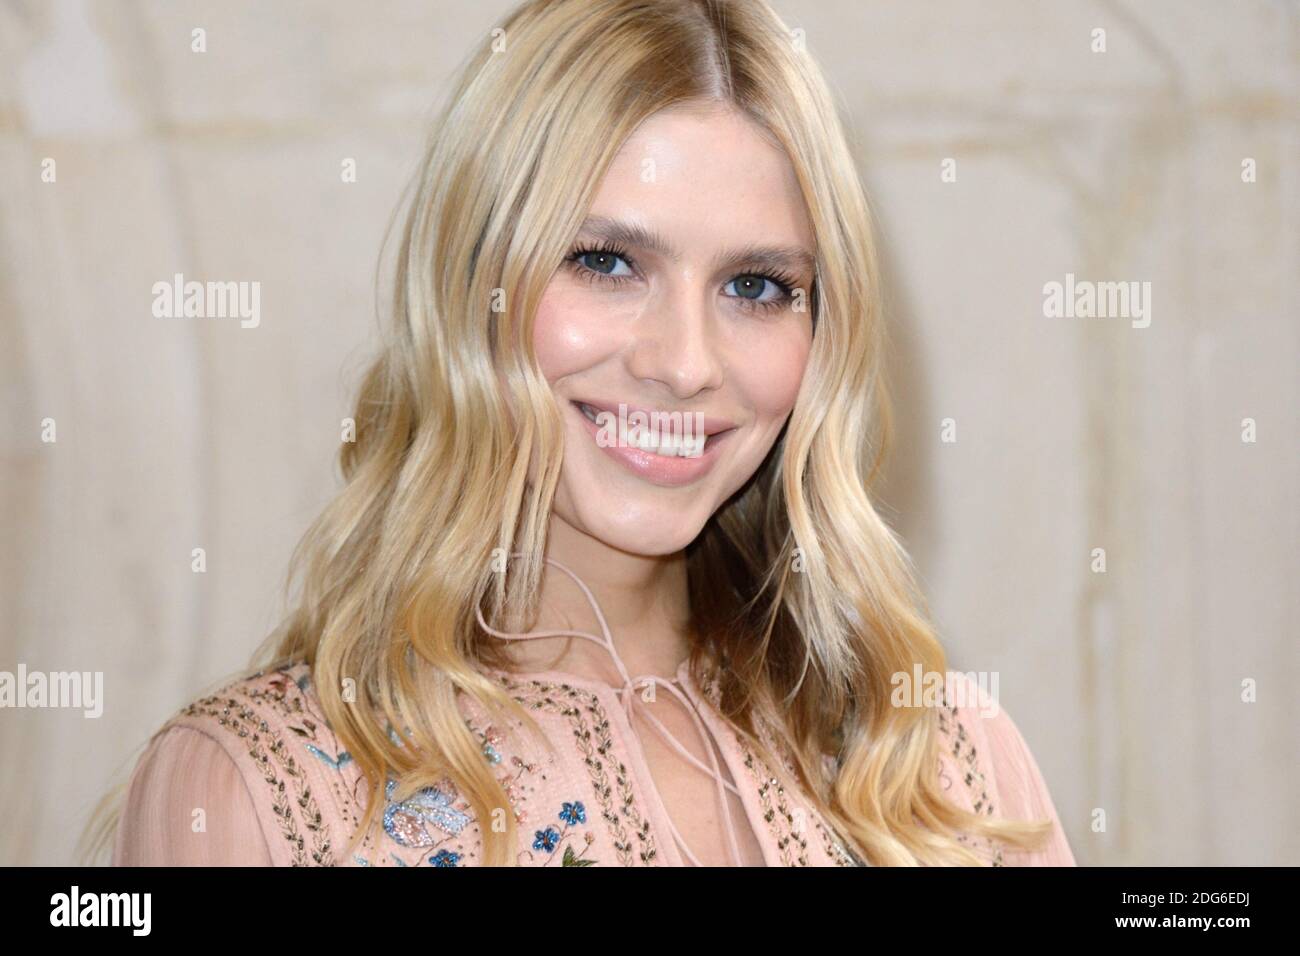 Elena Perminova attending the Christian Dior show during Paris Fashion Week Ready to wear FallWinter 2017-18 on March 03, 2017 in Paris, France. Photo by Aurore Marechal/ABACAPRESS.COM Stock Photo